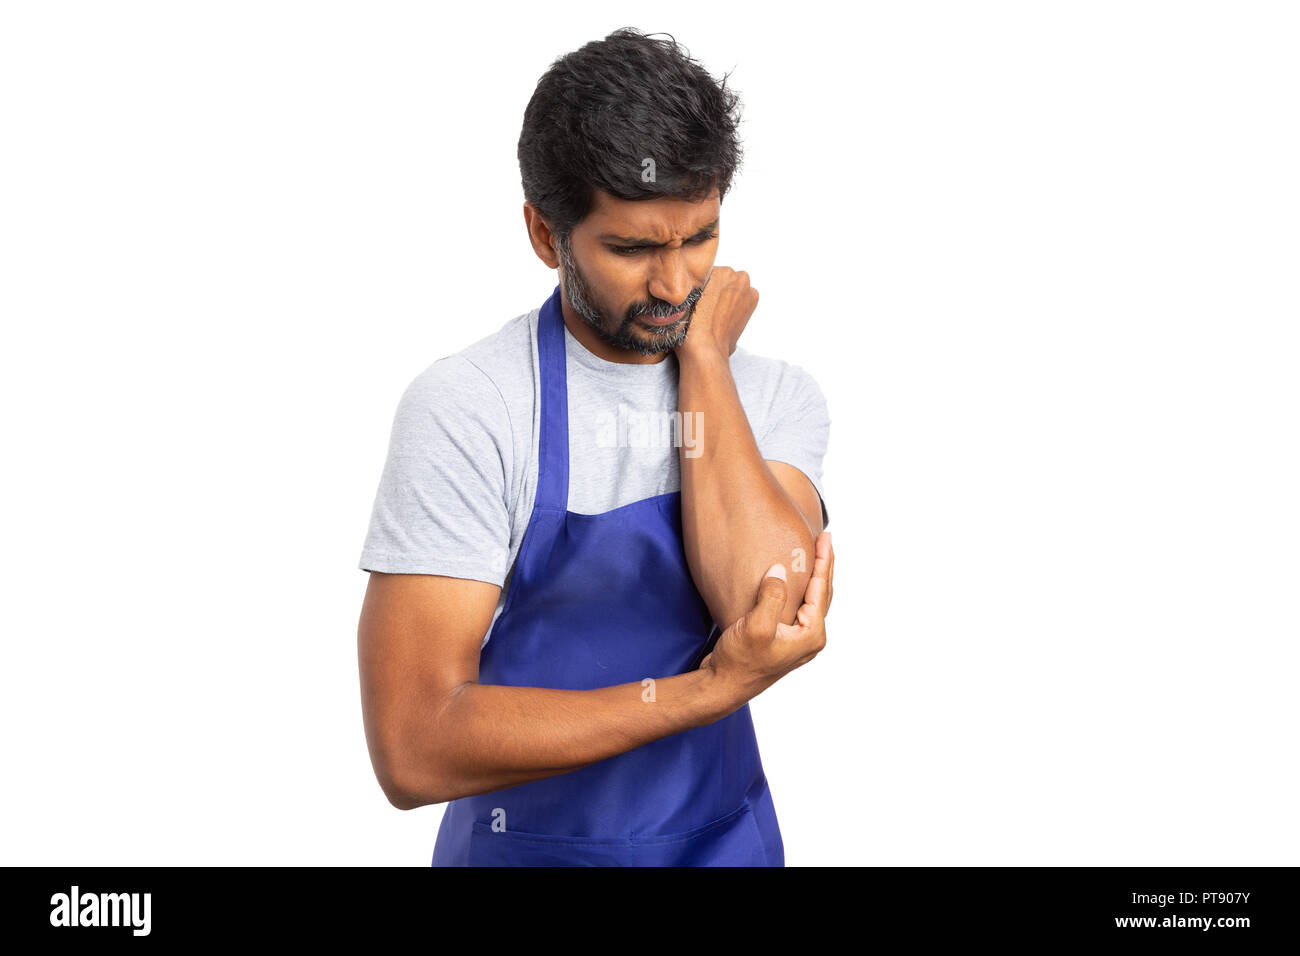 Concerned supermarket or hypermarket employee holding painful elbow with hand isolated on white background Stock Photo